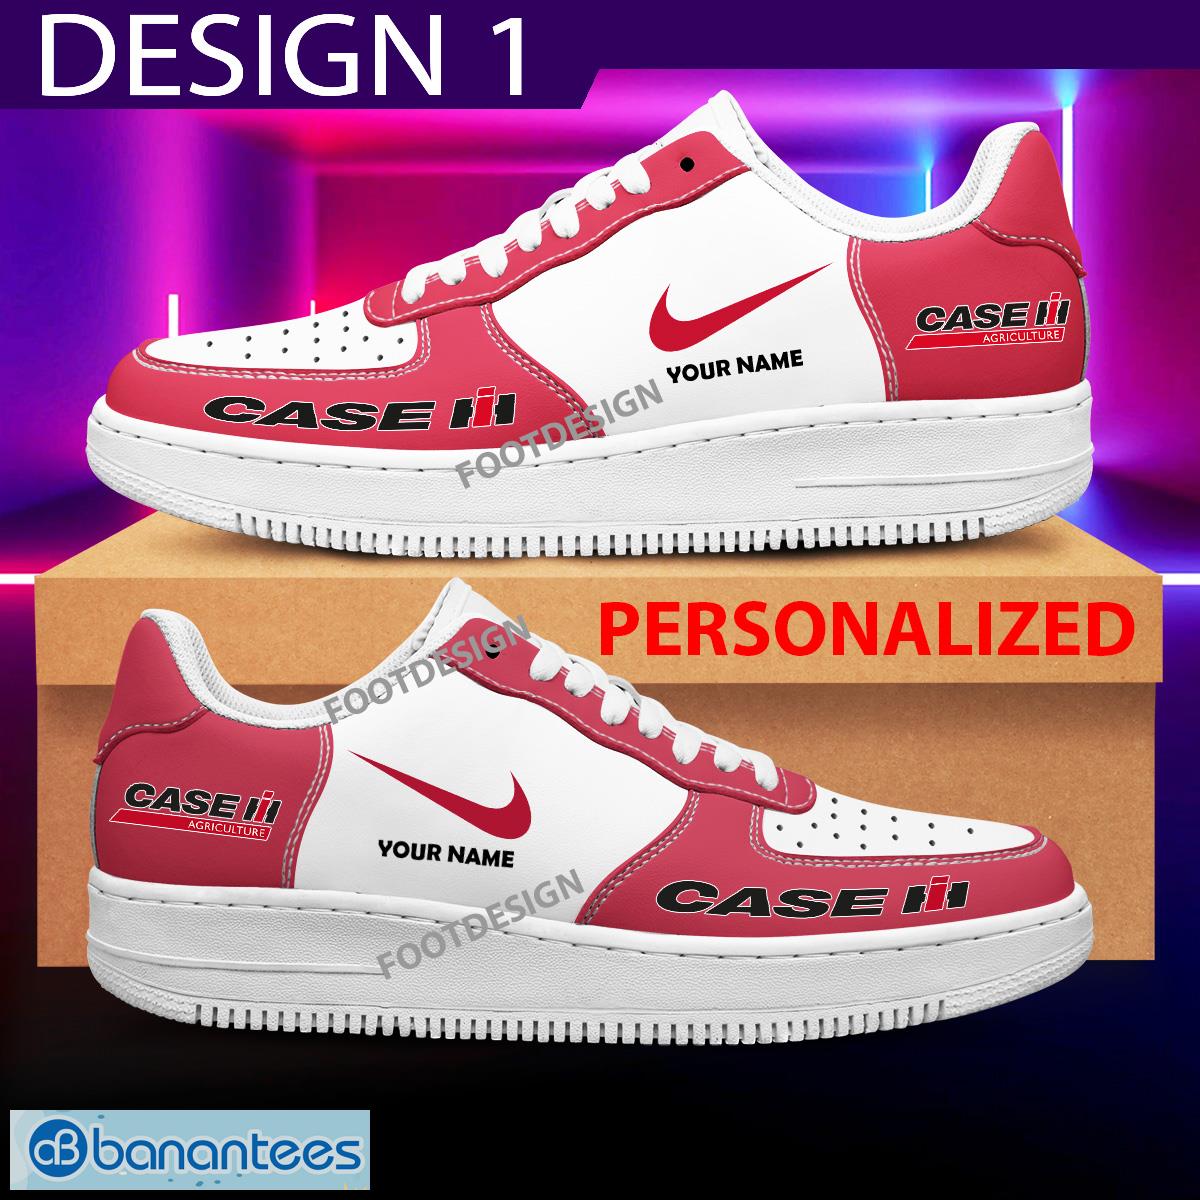 Case IH Tractor Air Force 1 Shoes Personalized Gift AF1 Sneaker For Men Women - Case IH Tractor Air Force 1 Shoes Personalized Photo 1